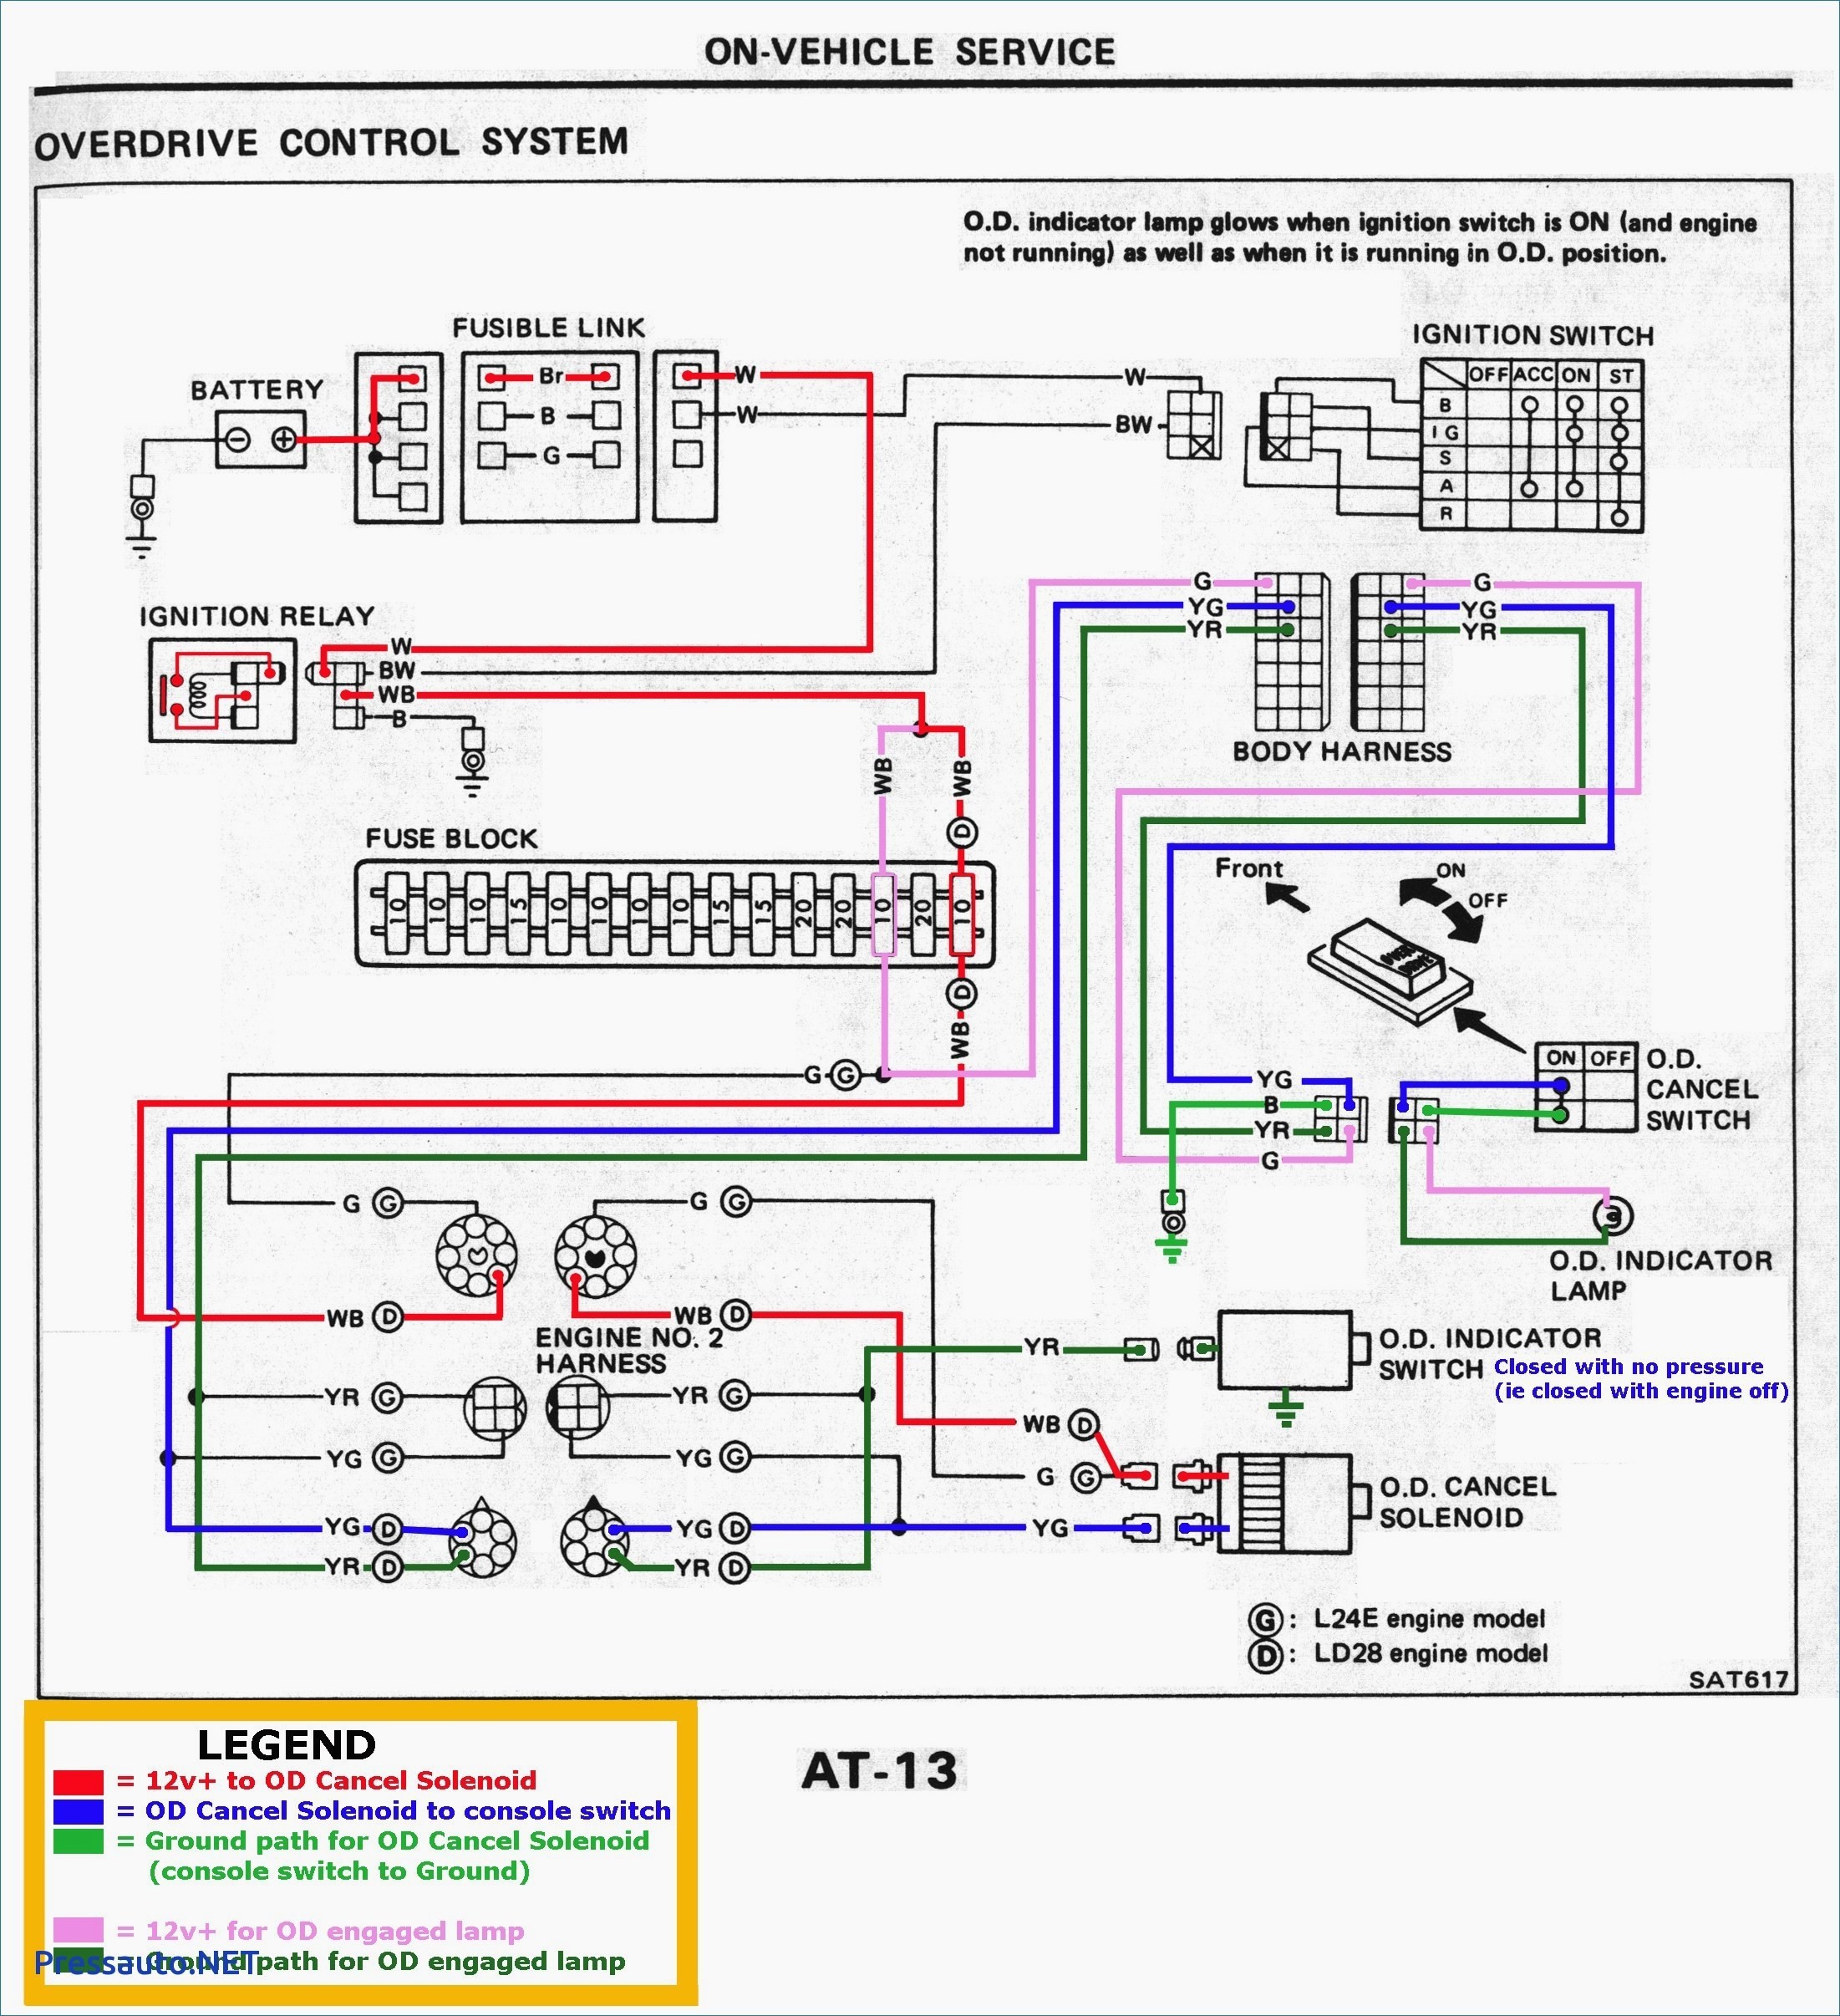 Clifford Car Alarm Wiring Diagram House Wiring Diagram Ireland Free Downloads Best Hall and Landing Of Clifford Car Alarm Wiring Diagram